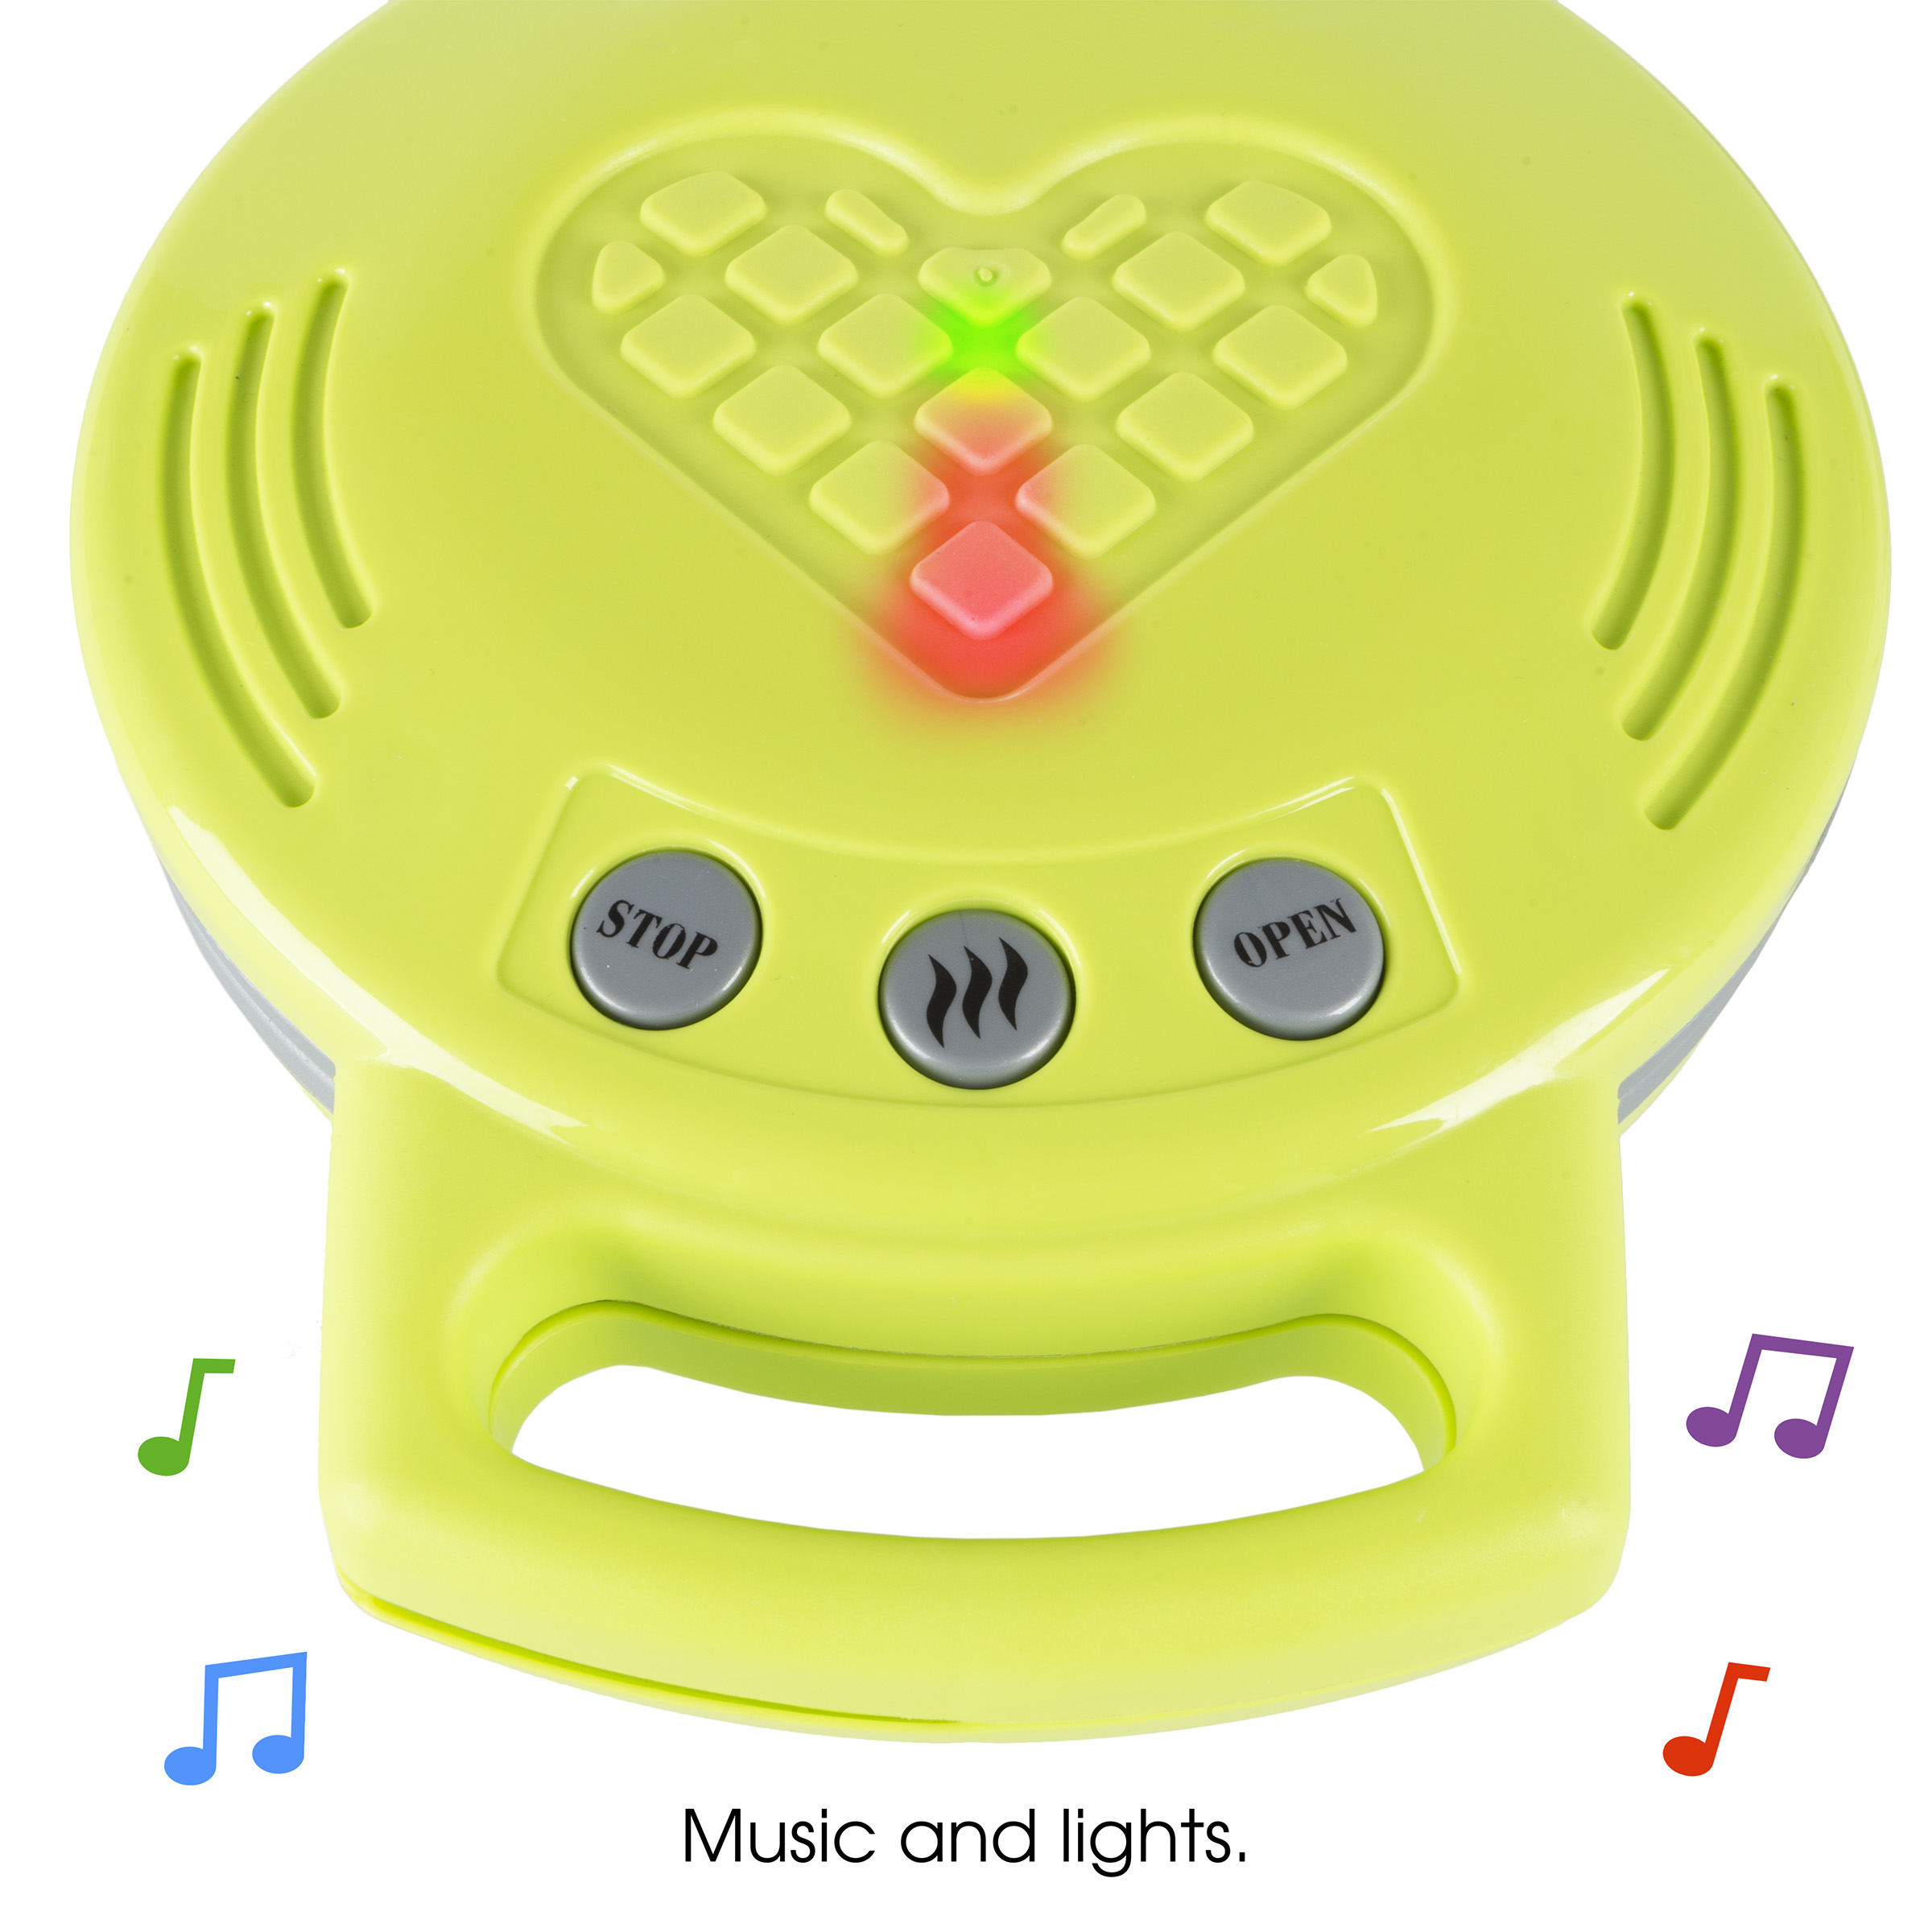 Kids Toy Waffle Iron Set with Music and Lights - Fun Pretend Play Waffle Making Kit by Hey! Play! - image 5 of 7